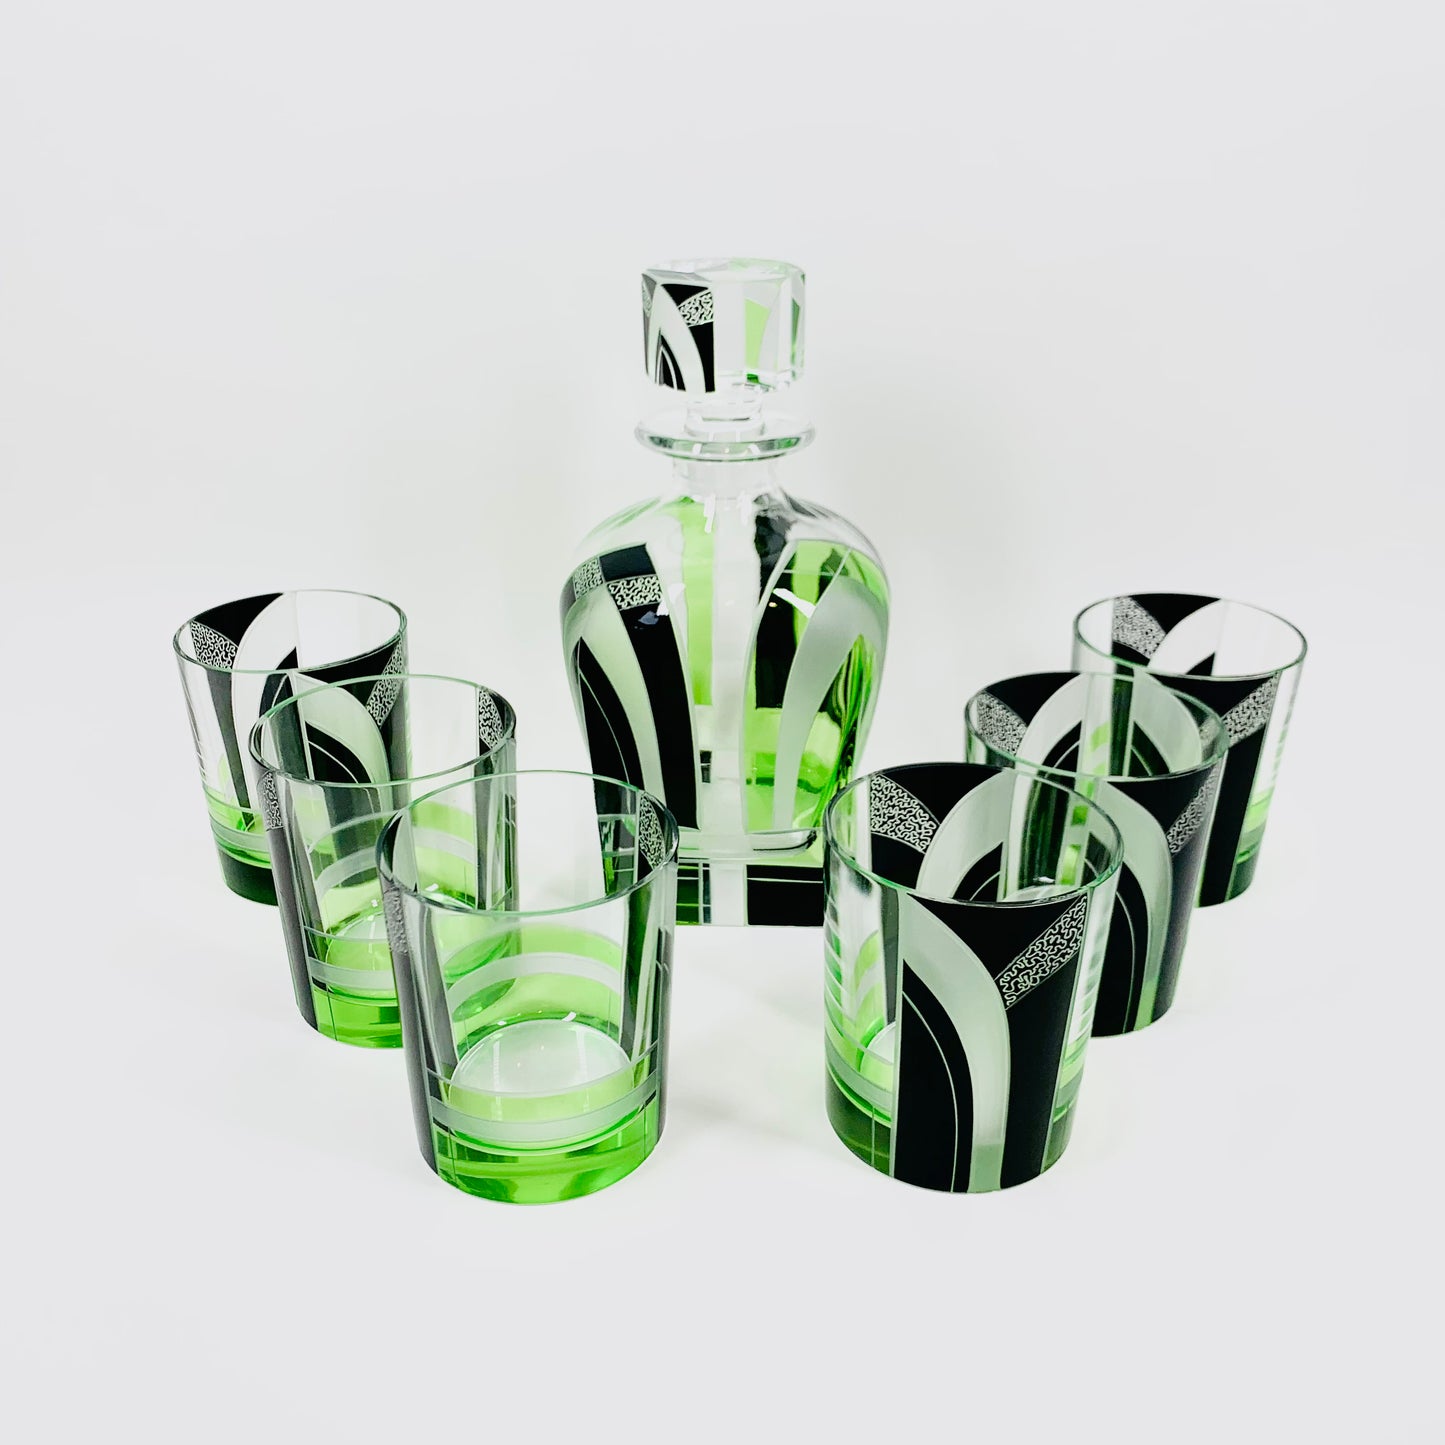 Extremely extremely rare antique Art Deco green & black enamel glass decanter set by Karl Palda